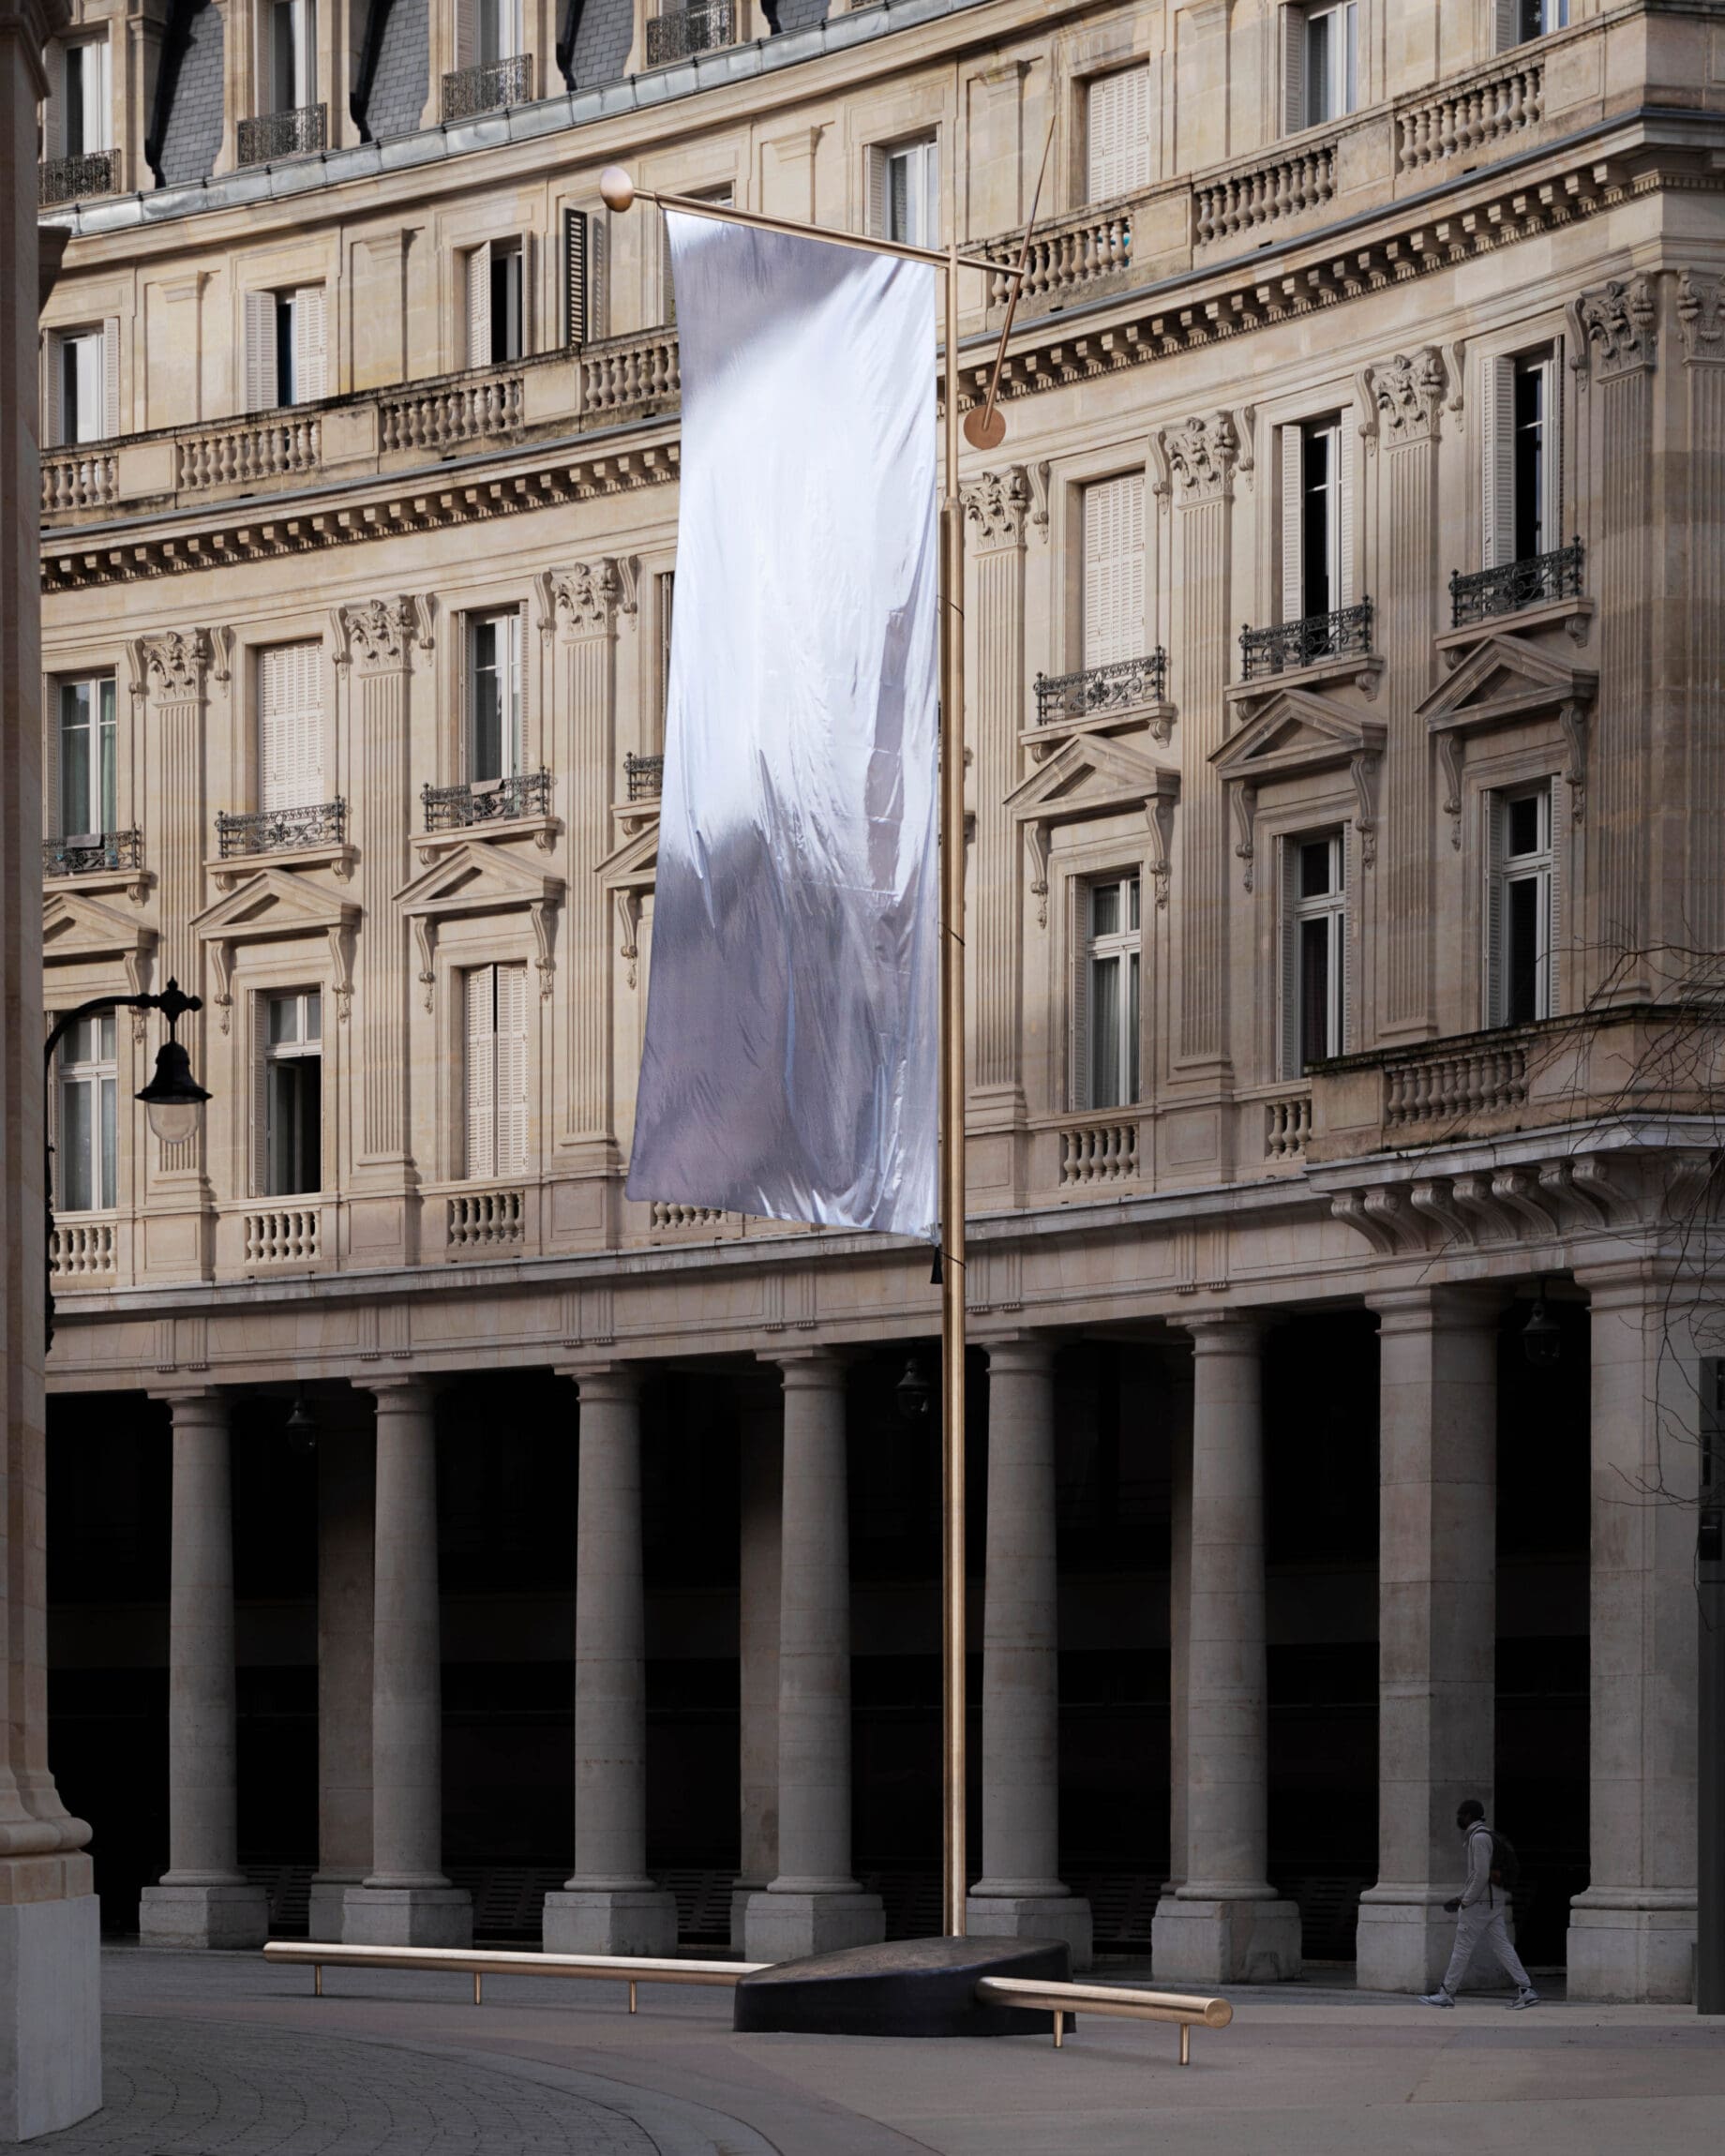 The best art galleries and museums in Paris | The Bourse de Commerce with a flag designed by Ronan & Erwan Bouroullec